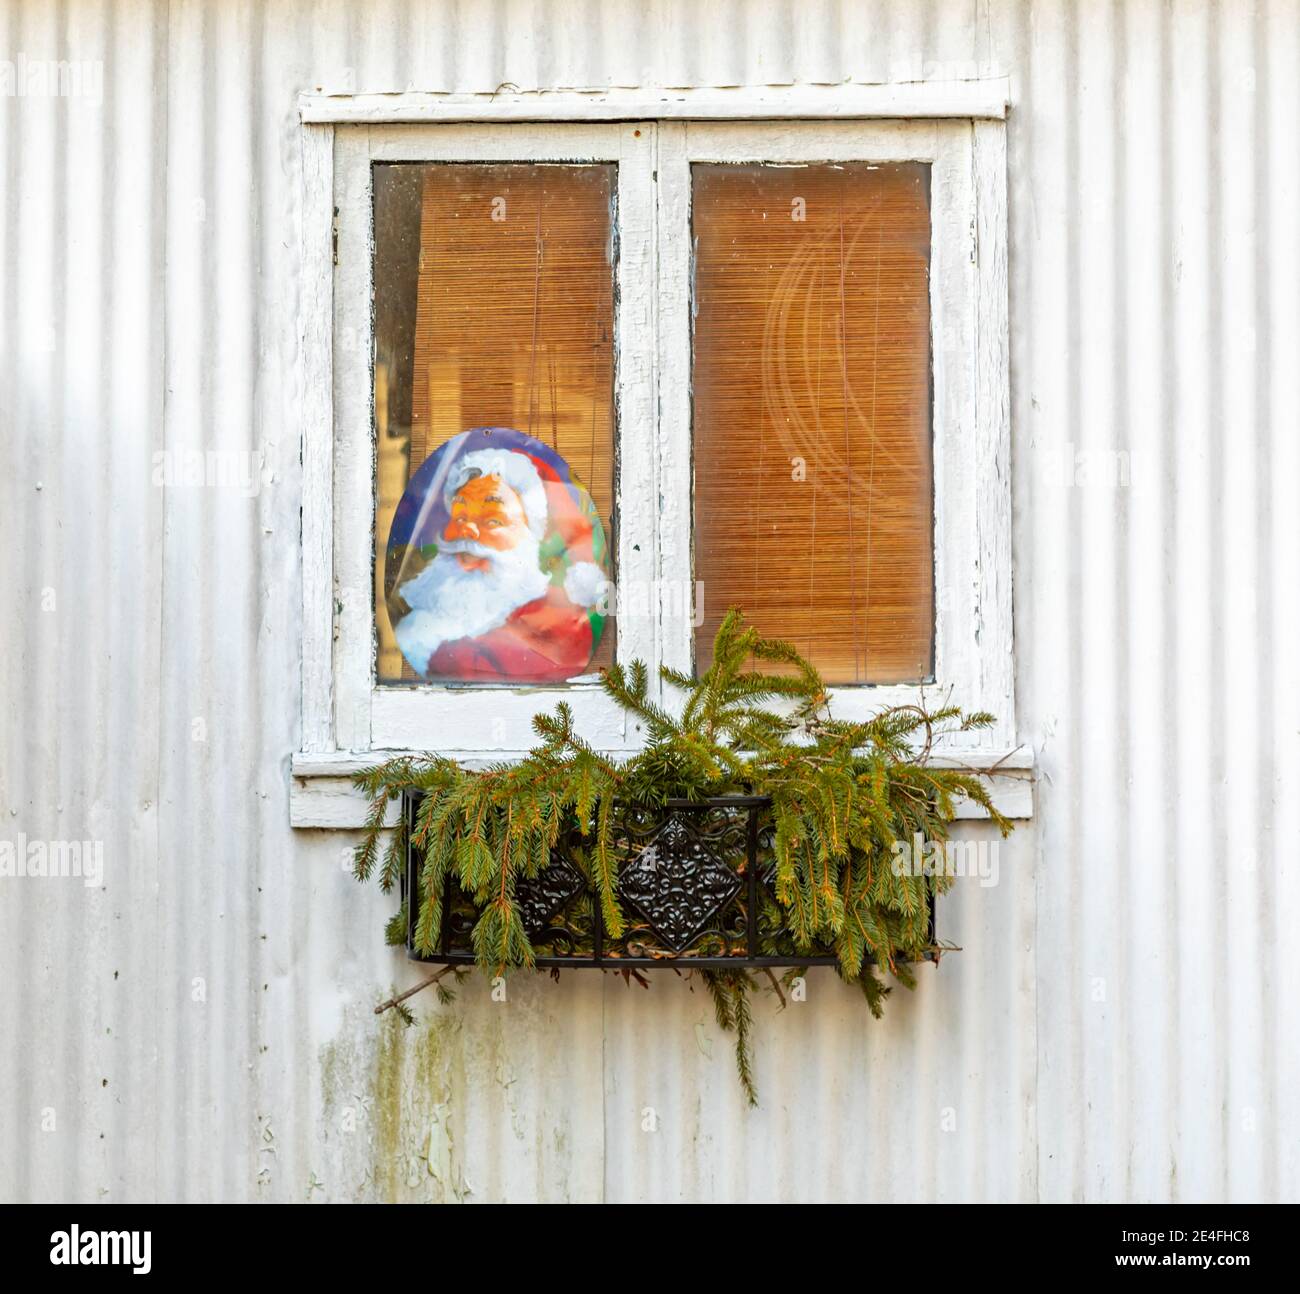 Image of Santa Claus in the window of an old house Stock Photo